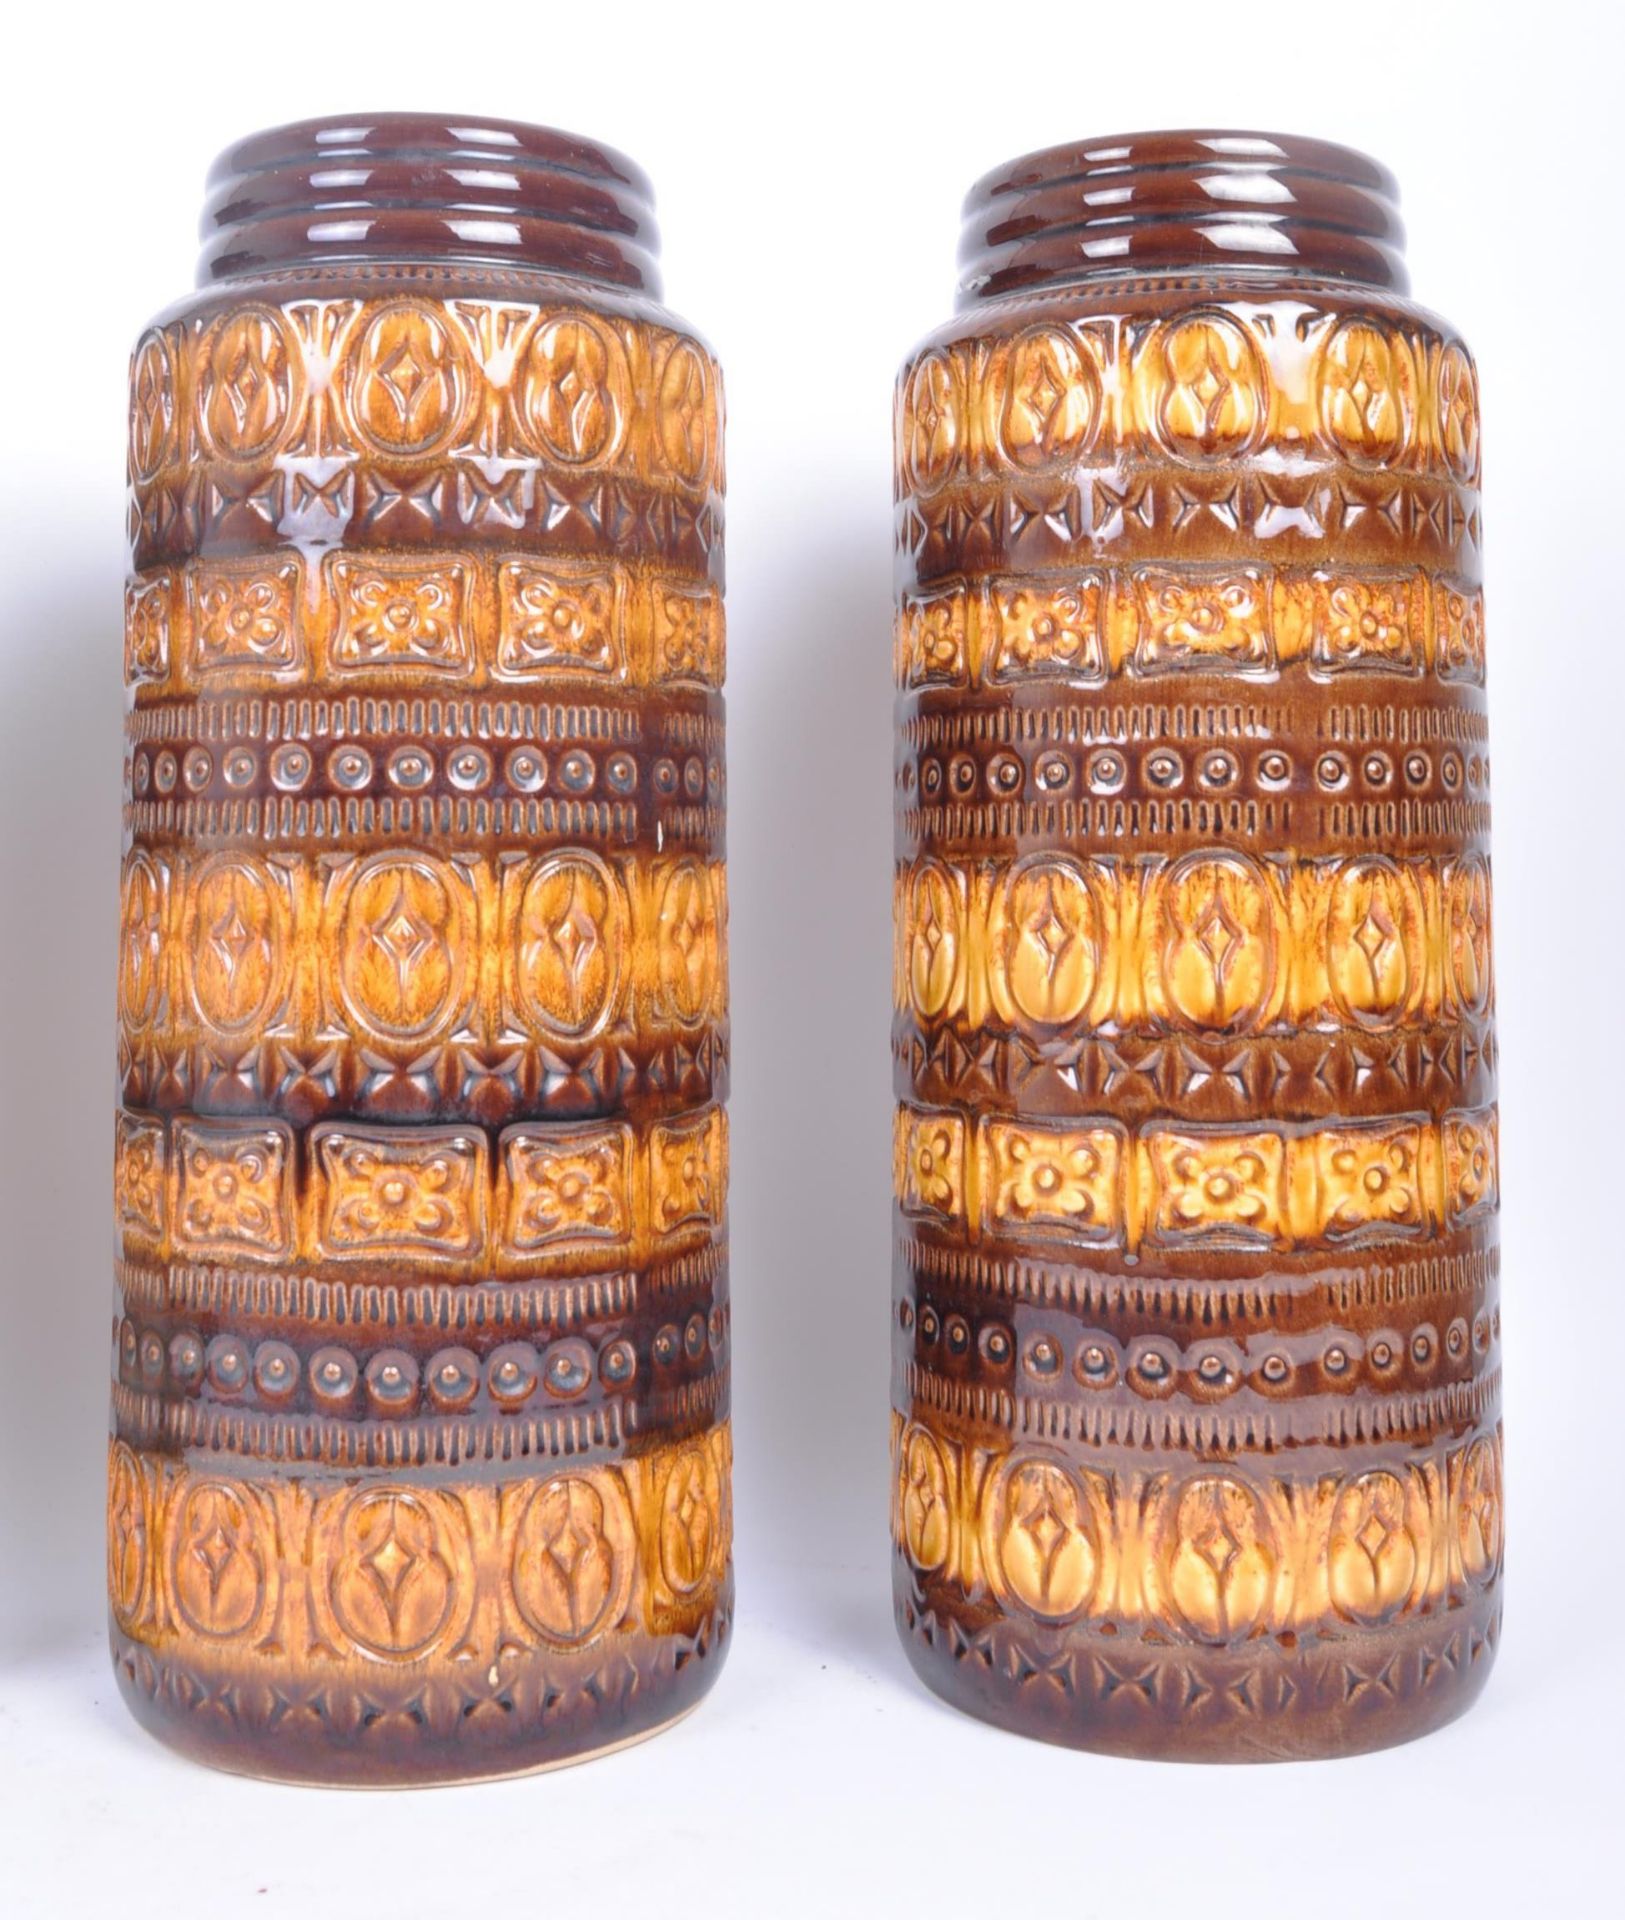 FOUR RETRO MID 20TH CENTURY WEST GERMAN POTTERY VASES - Image 2 of 5